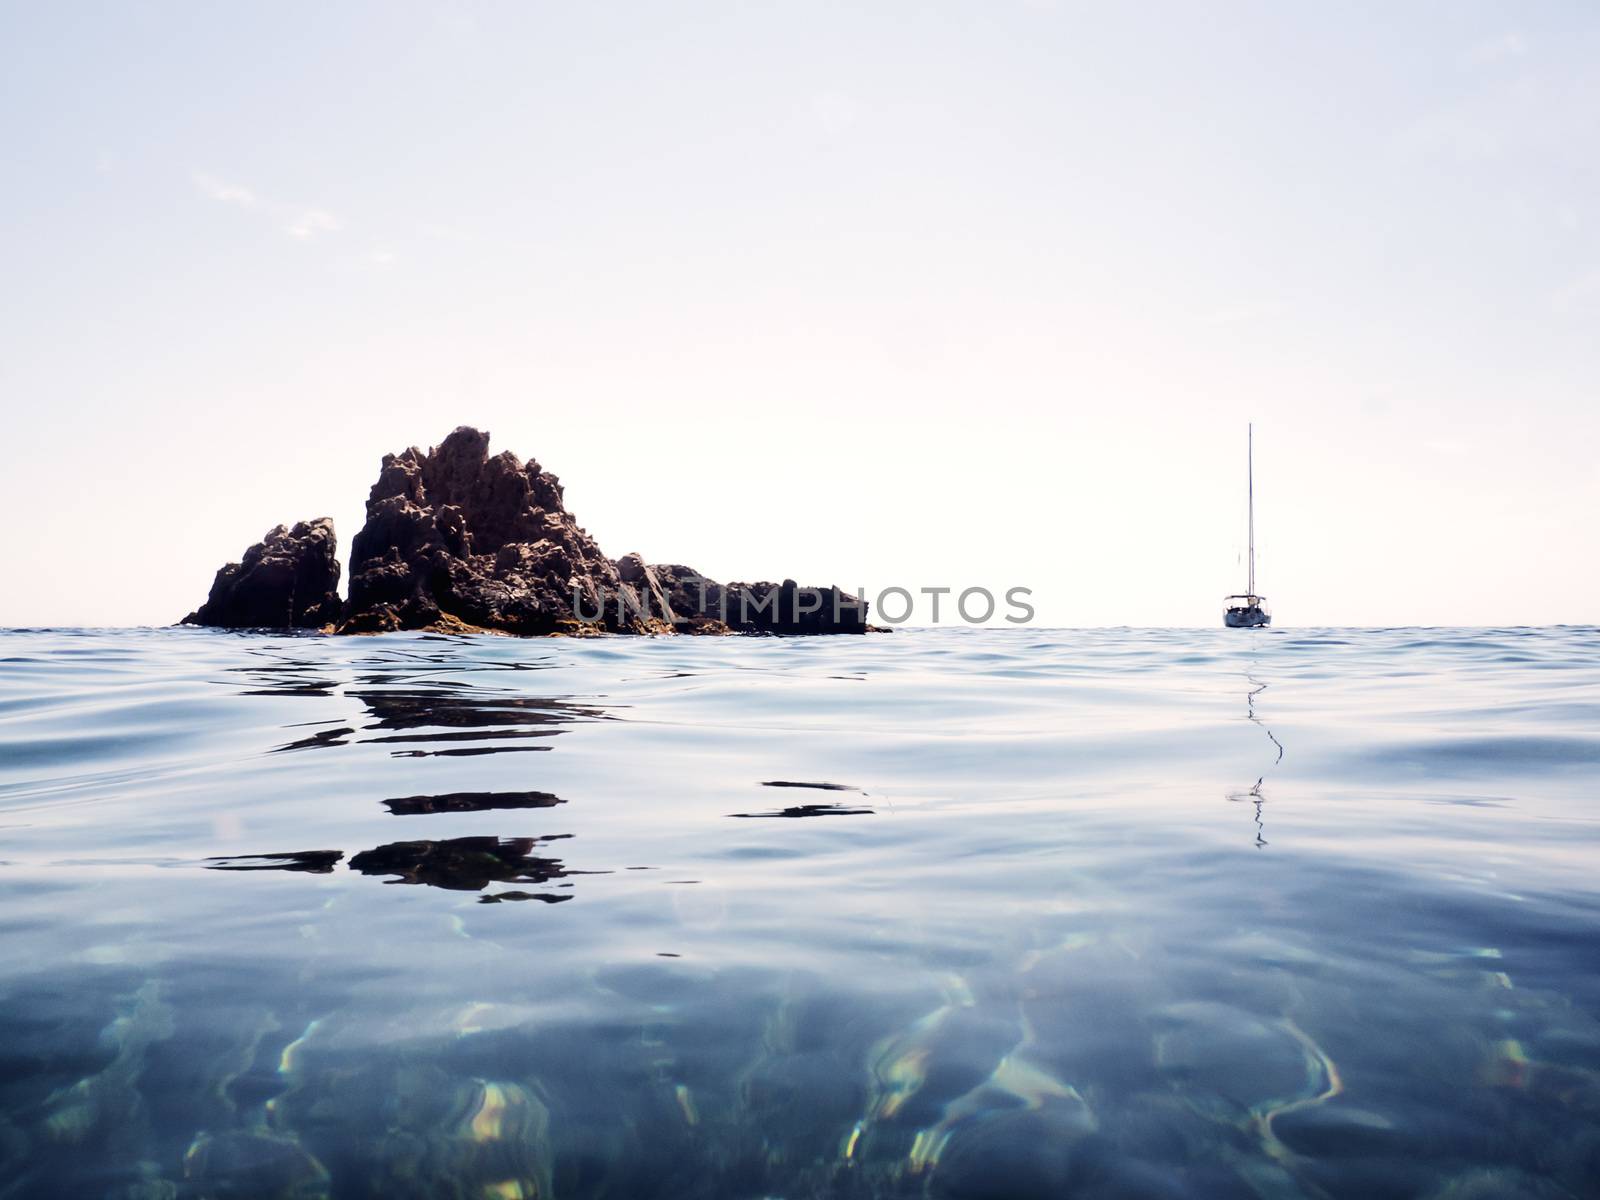 Mediterranean seascape with rocks and a boat by raulmelldo